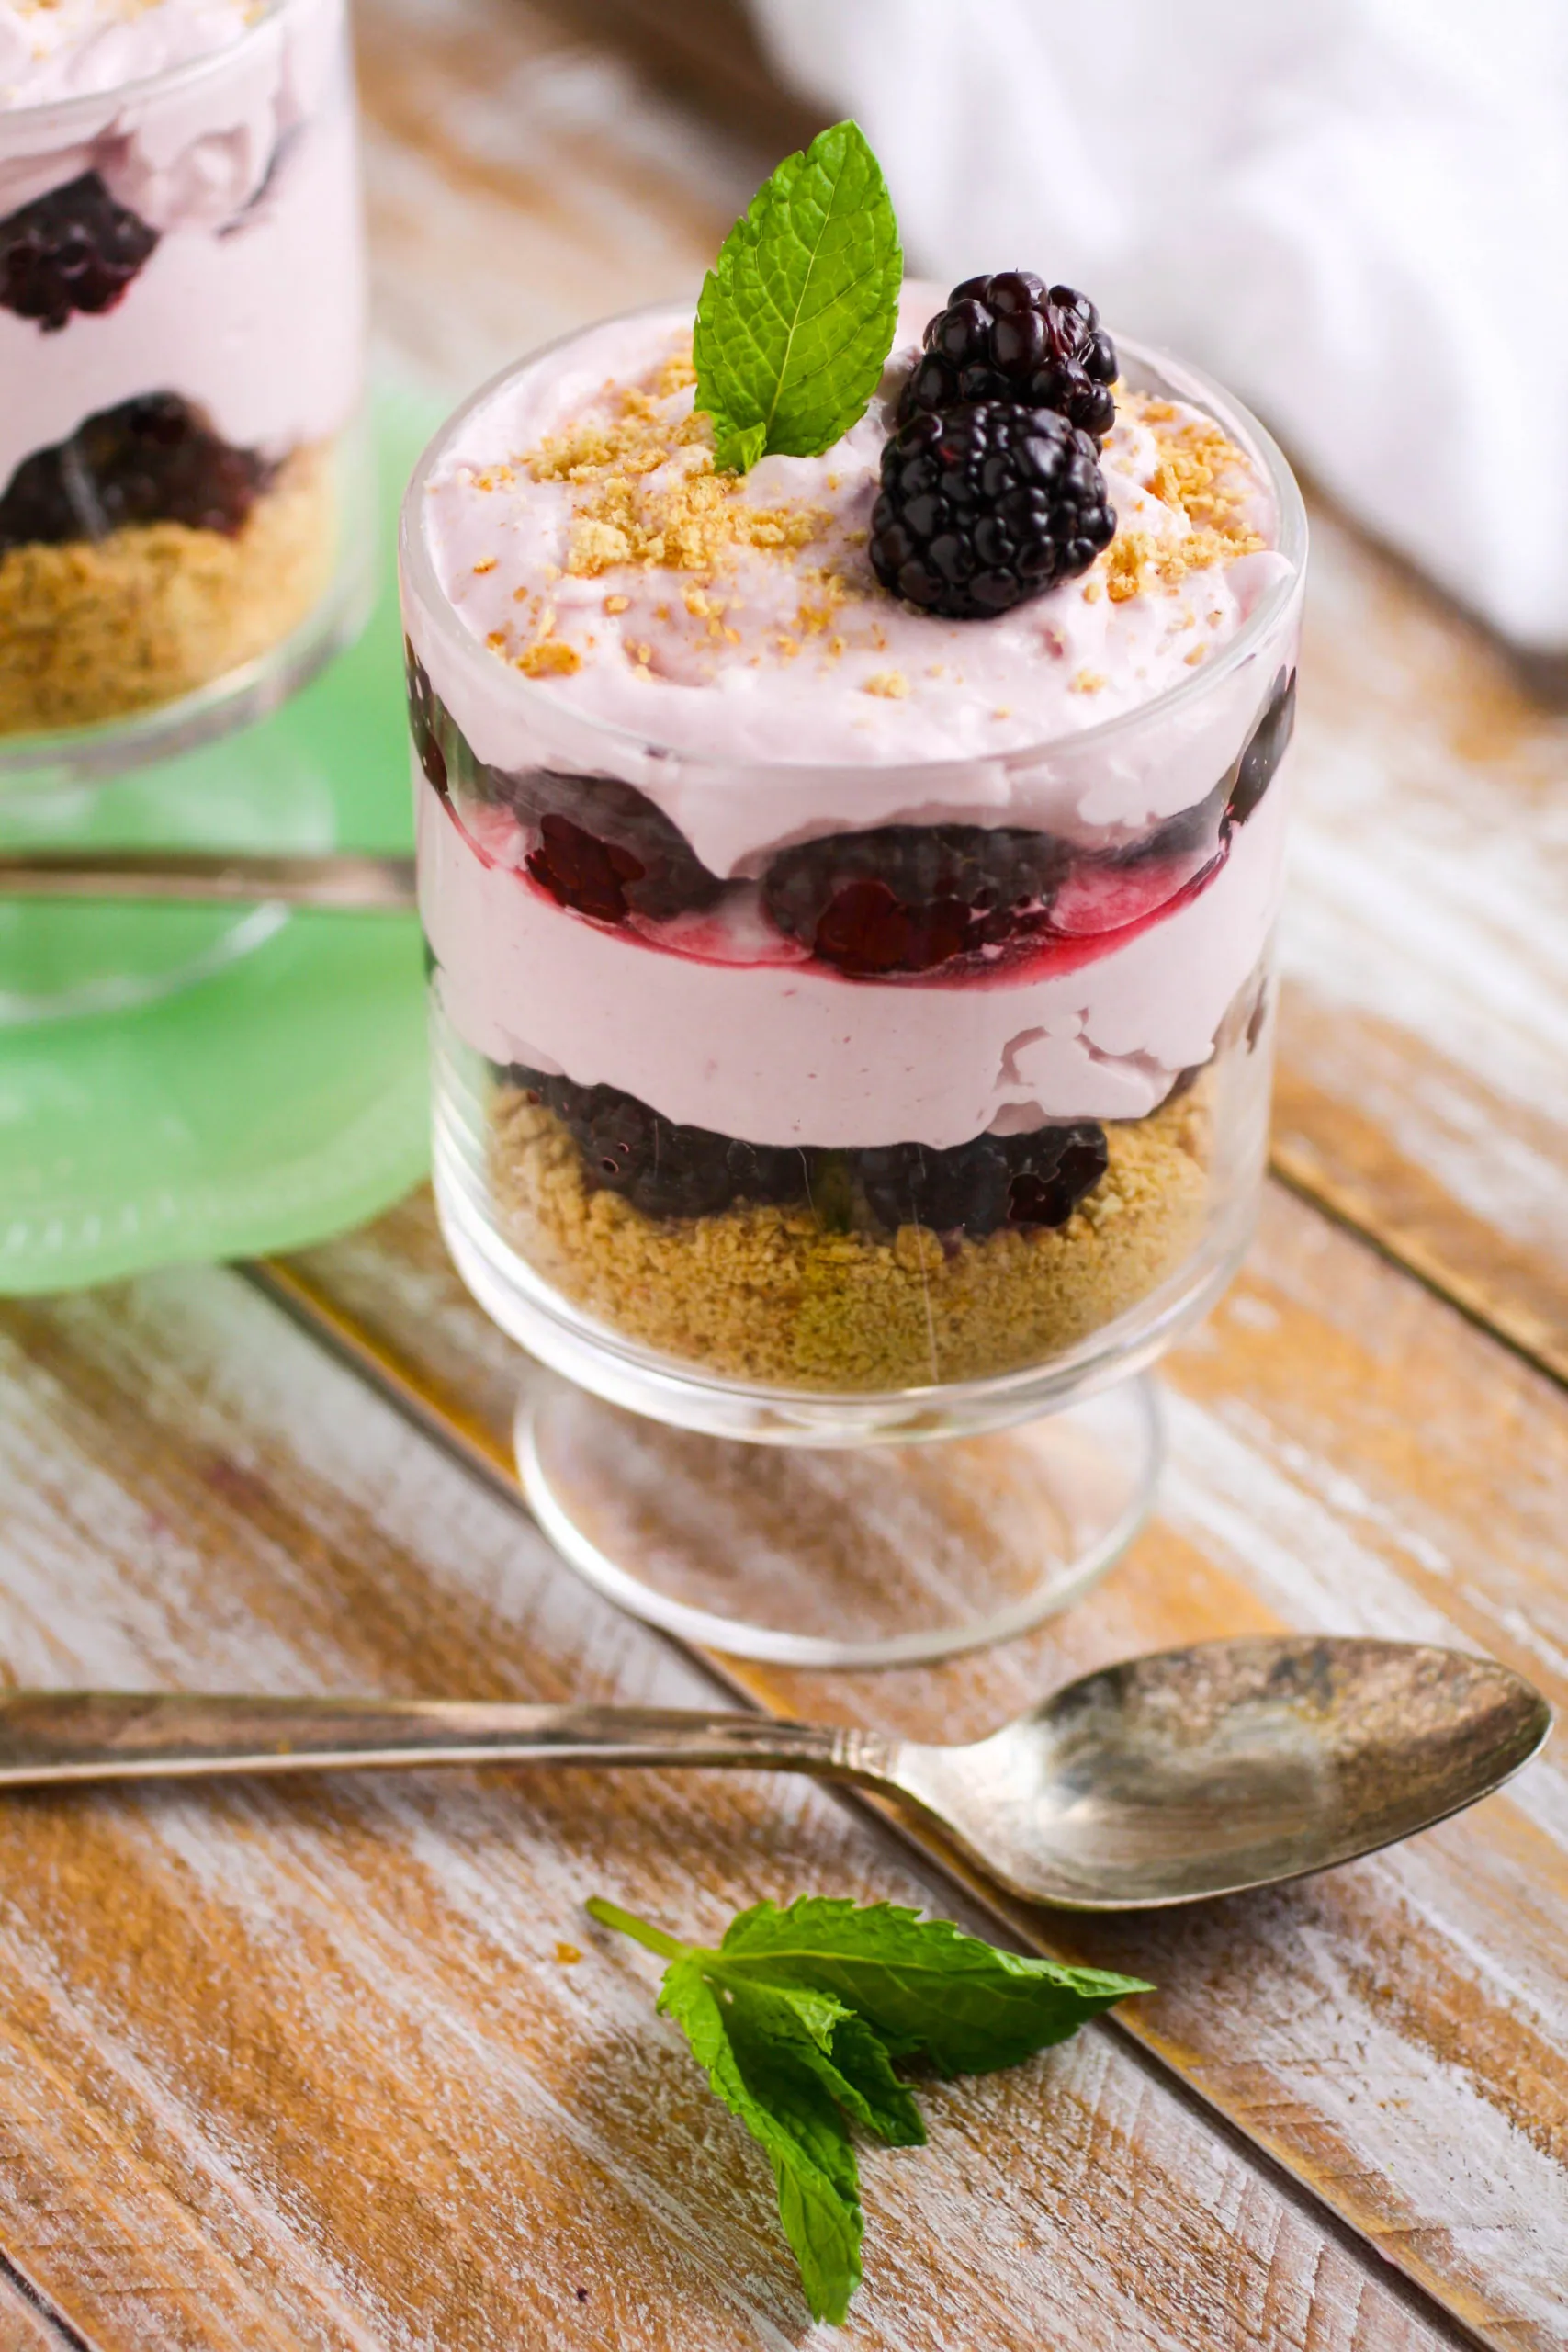 Enjoy these lovely No Bake Blackberry Cheesecake Parfaits for a dreamy treat!